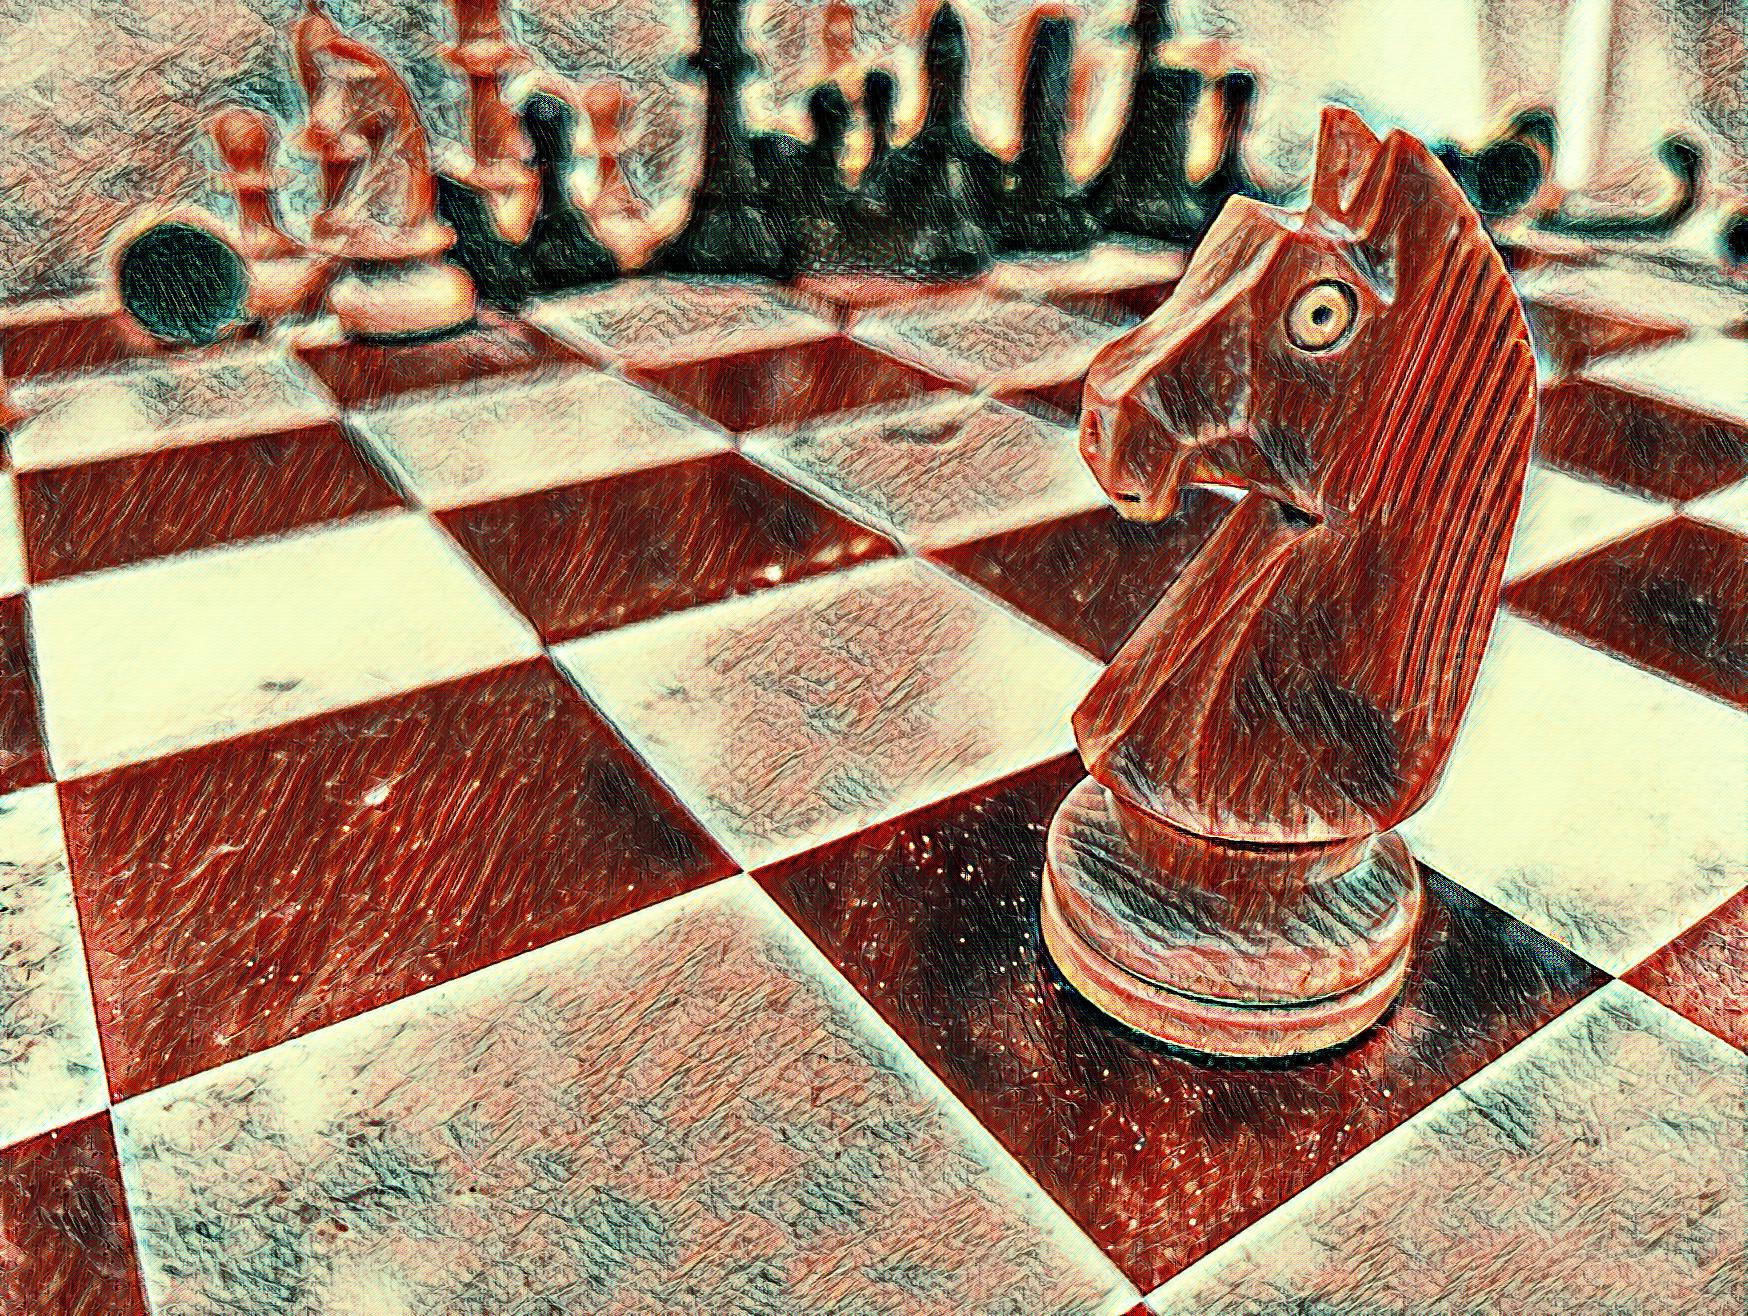 Premium Photo  Play national chess with business compass concept